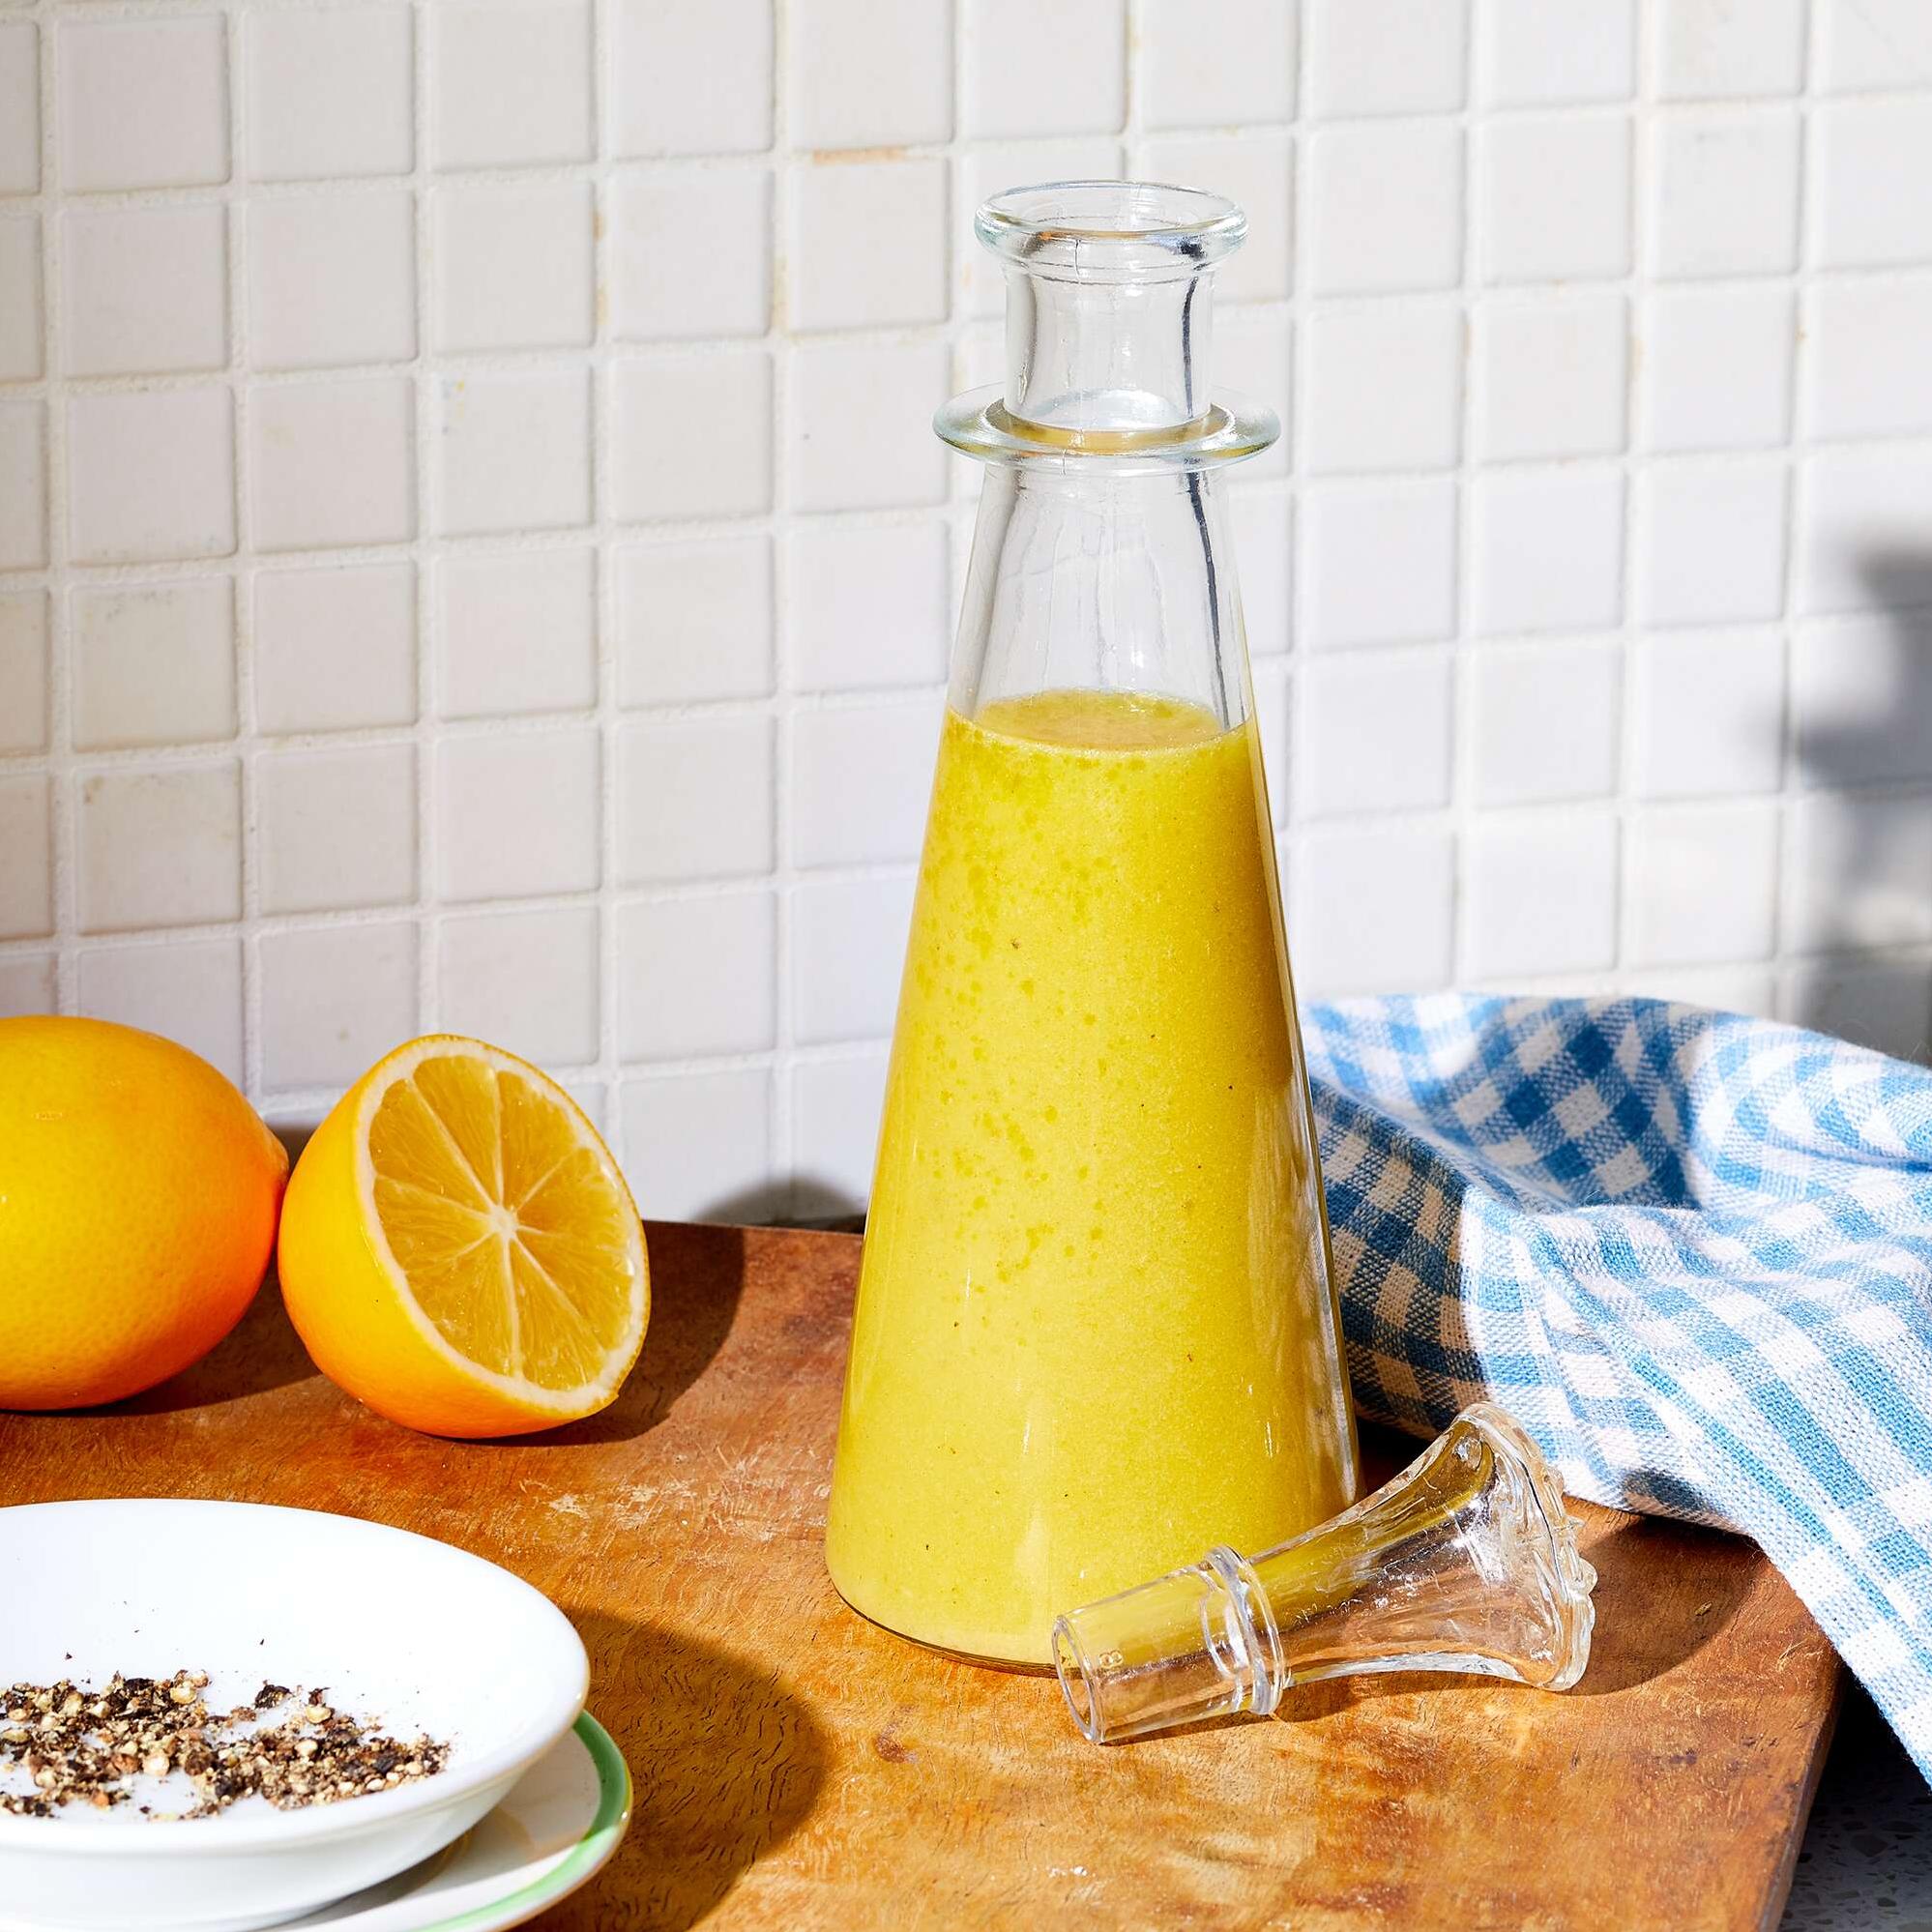  Vegan and gluten-free, this vinaigrette is perfect for any dietary restrictions.